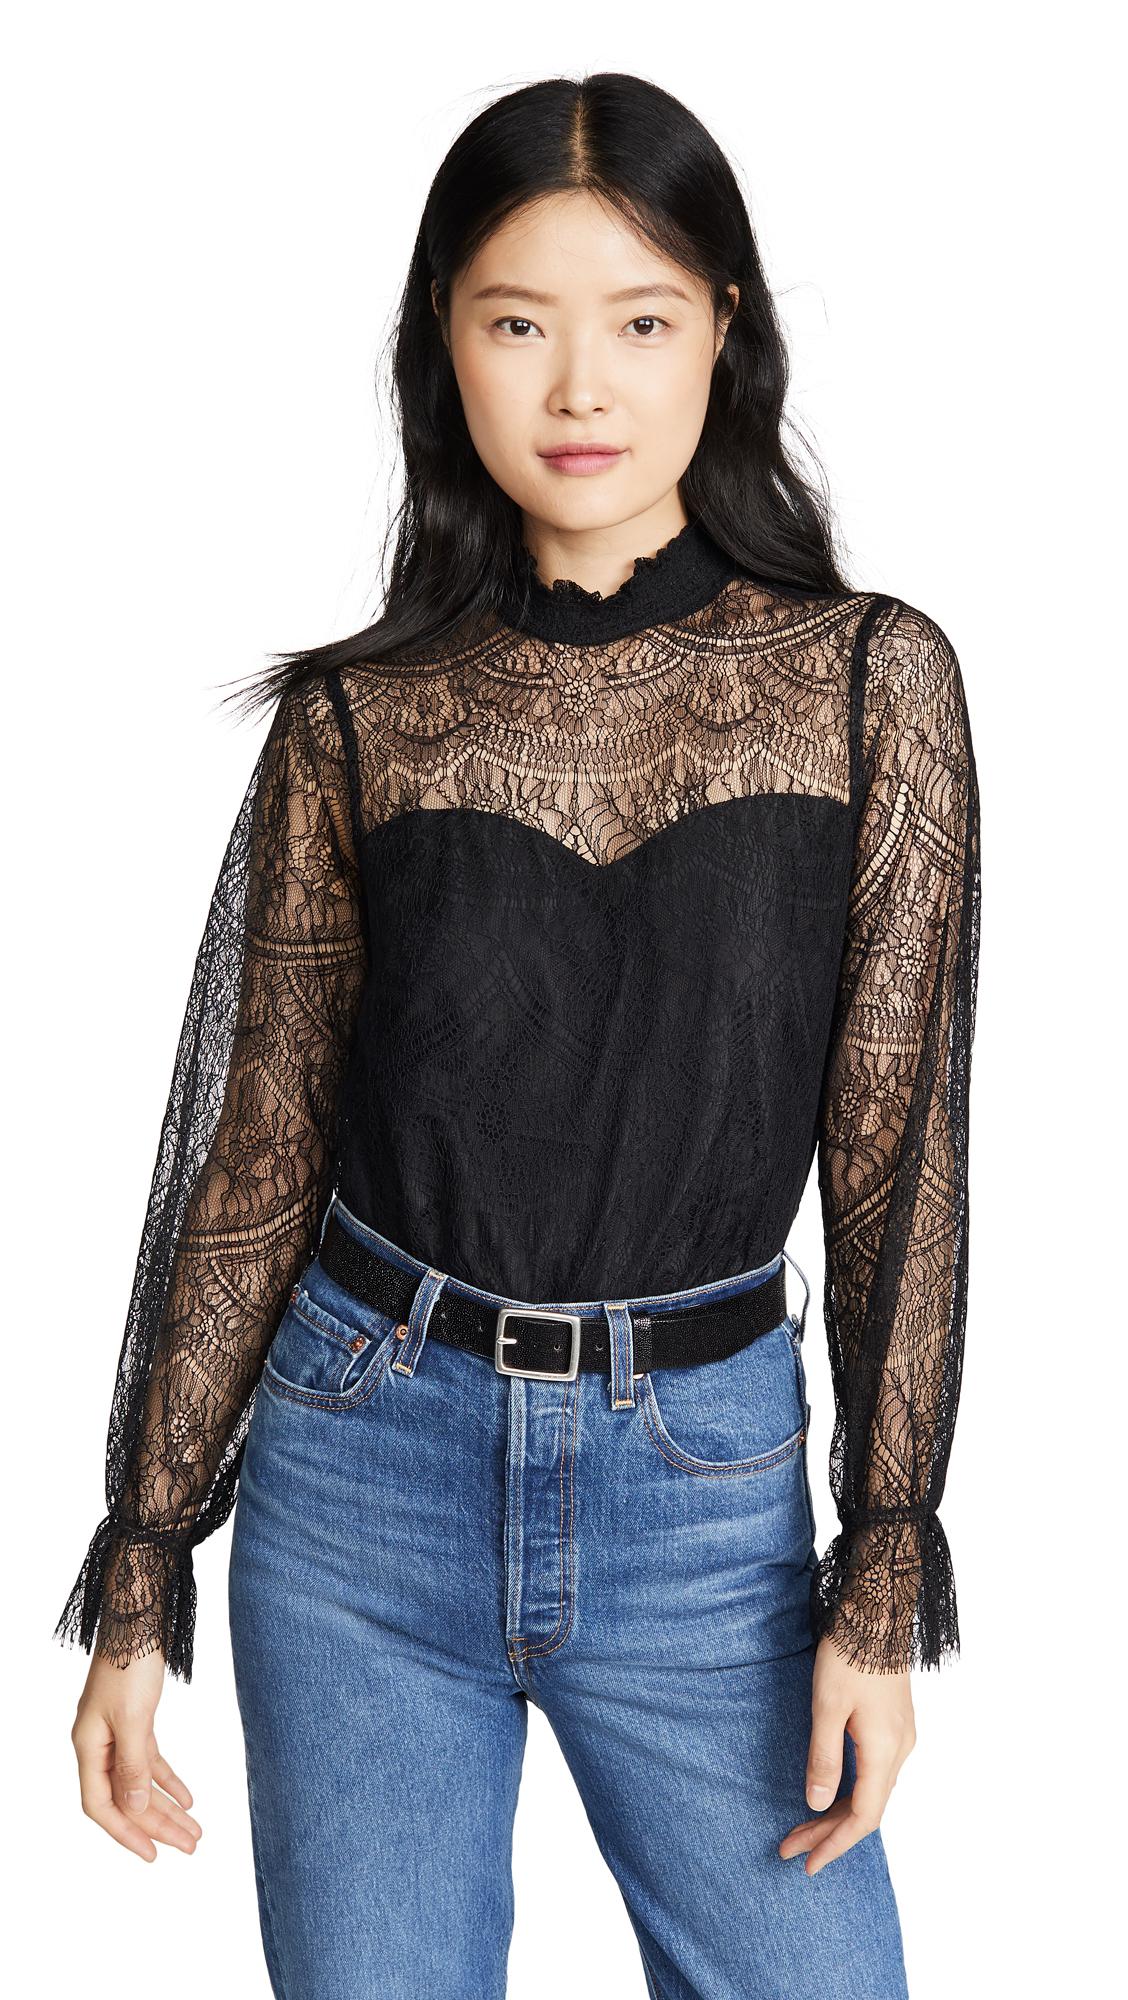 Cupcakes And Cashmere Lace Ambition Blouse in Black - Lyst